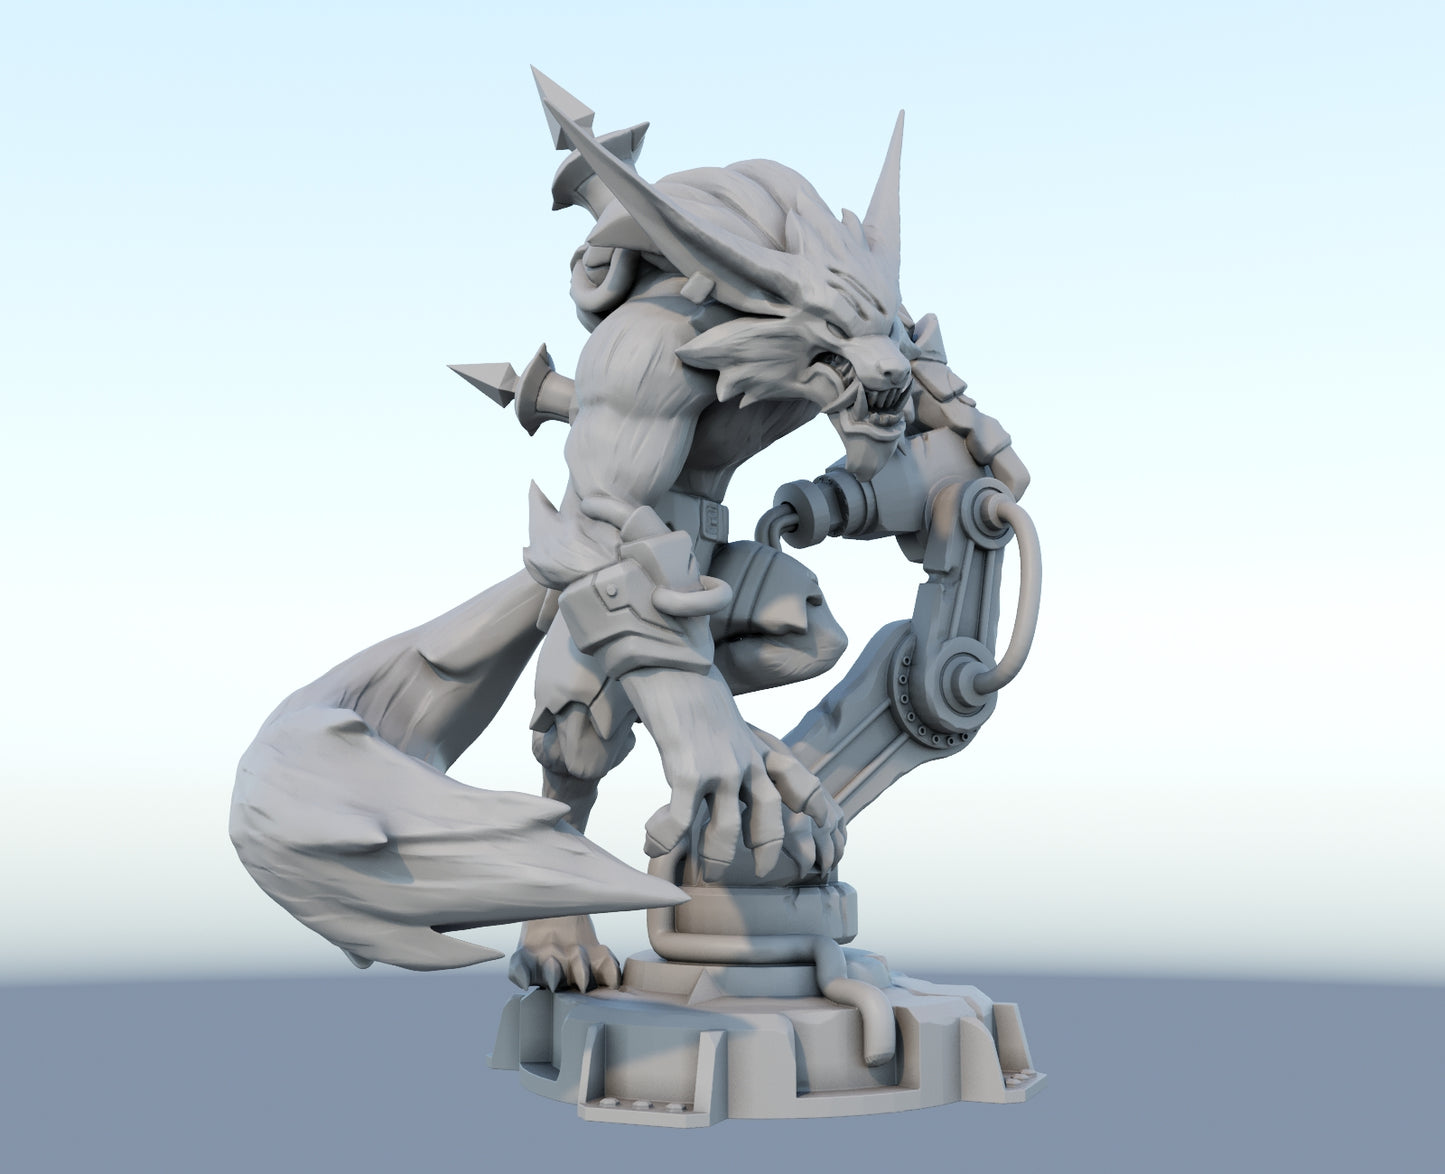 Warwick 3D-printed League of Legends champion figure. Decorate your gaming setup or home with your favorite League of Legends champion! Choose between the unpainted version, perfect for you to paint yourself, or the hand-painted version by a professional painter. Order your figure today!